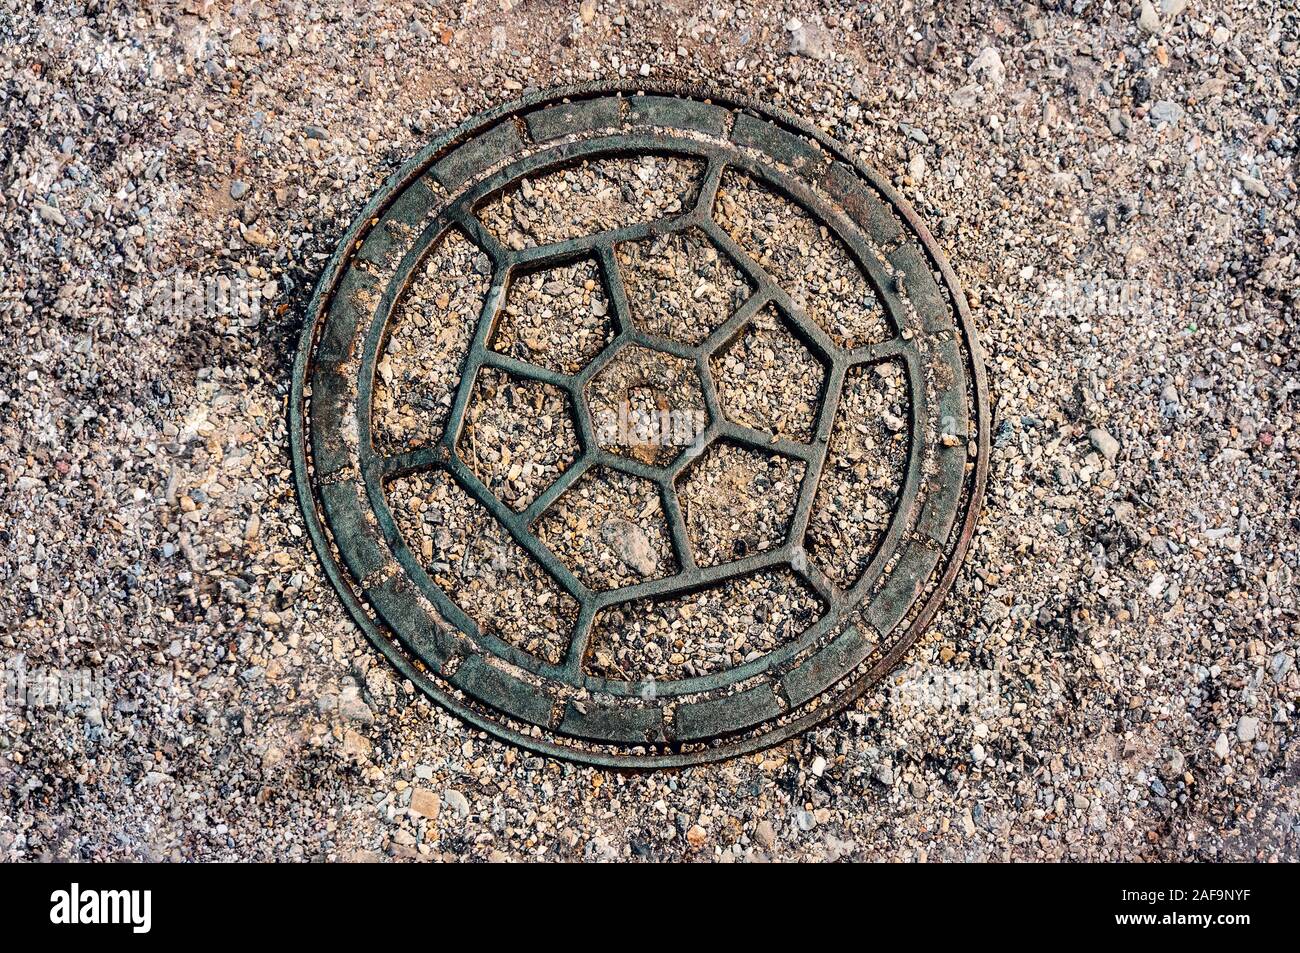 Closeup of decorative old man hole cover in Ceret, France, surrounded by gravel Stock Photo